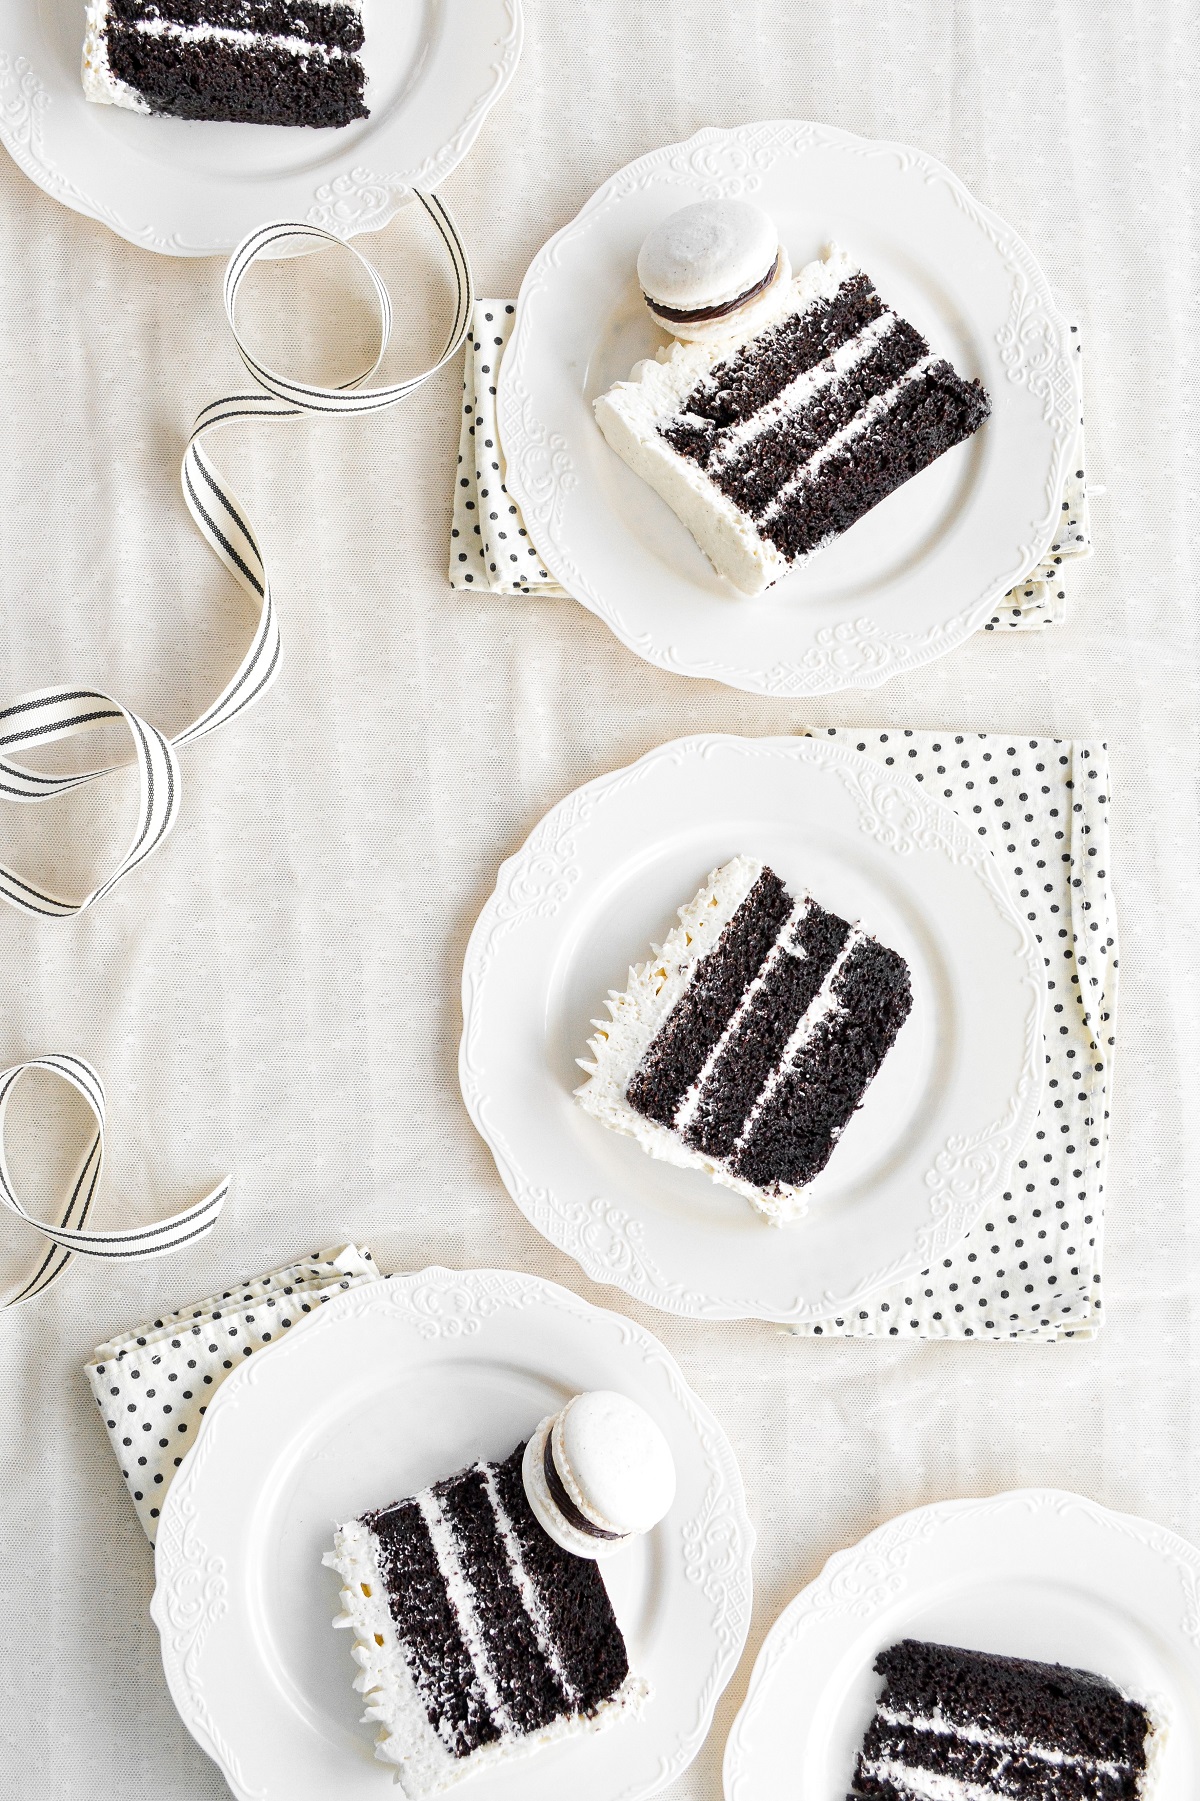 Slices of chocolate cake with vanilla buttercream on white plates.